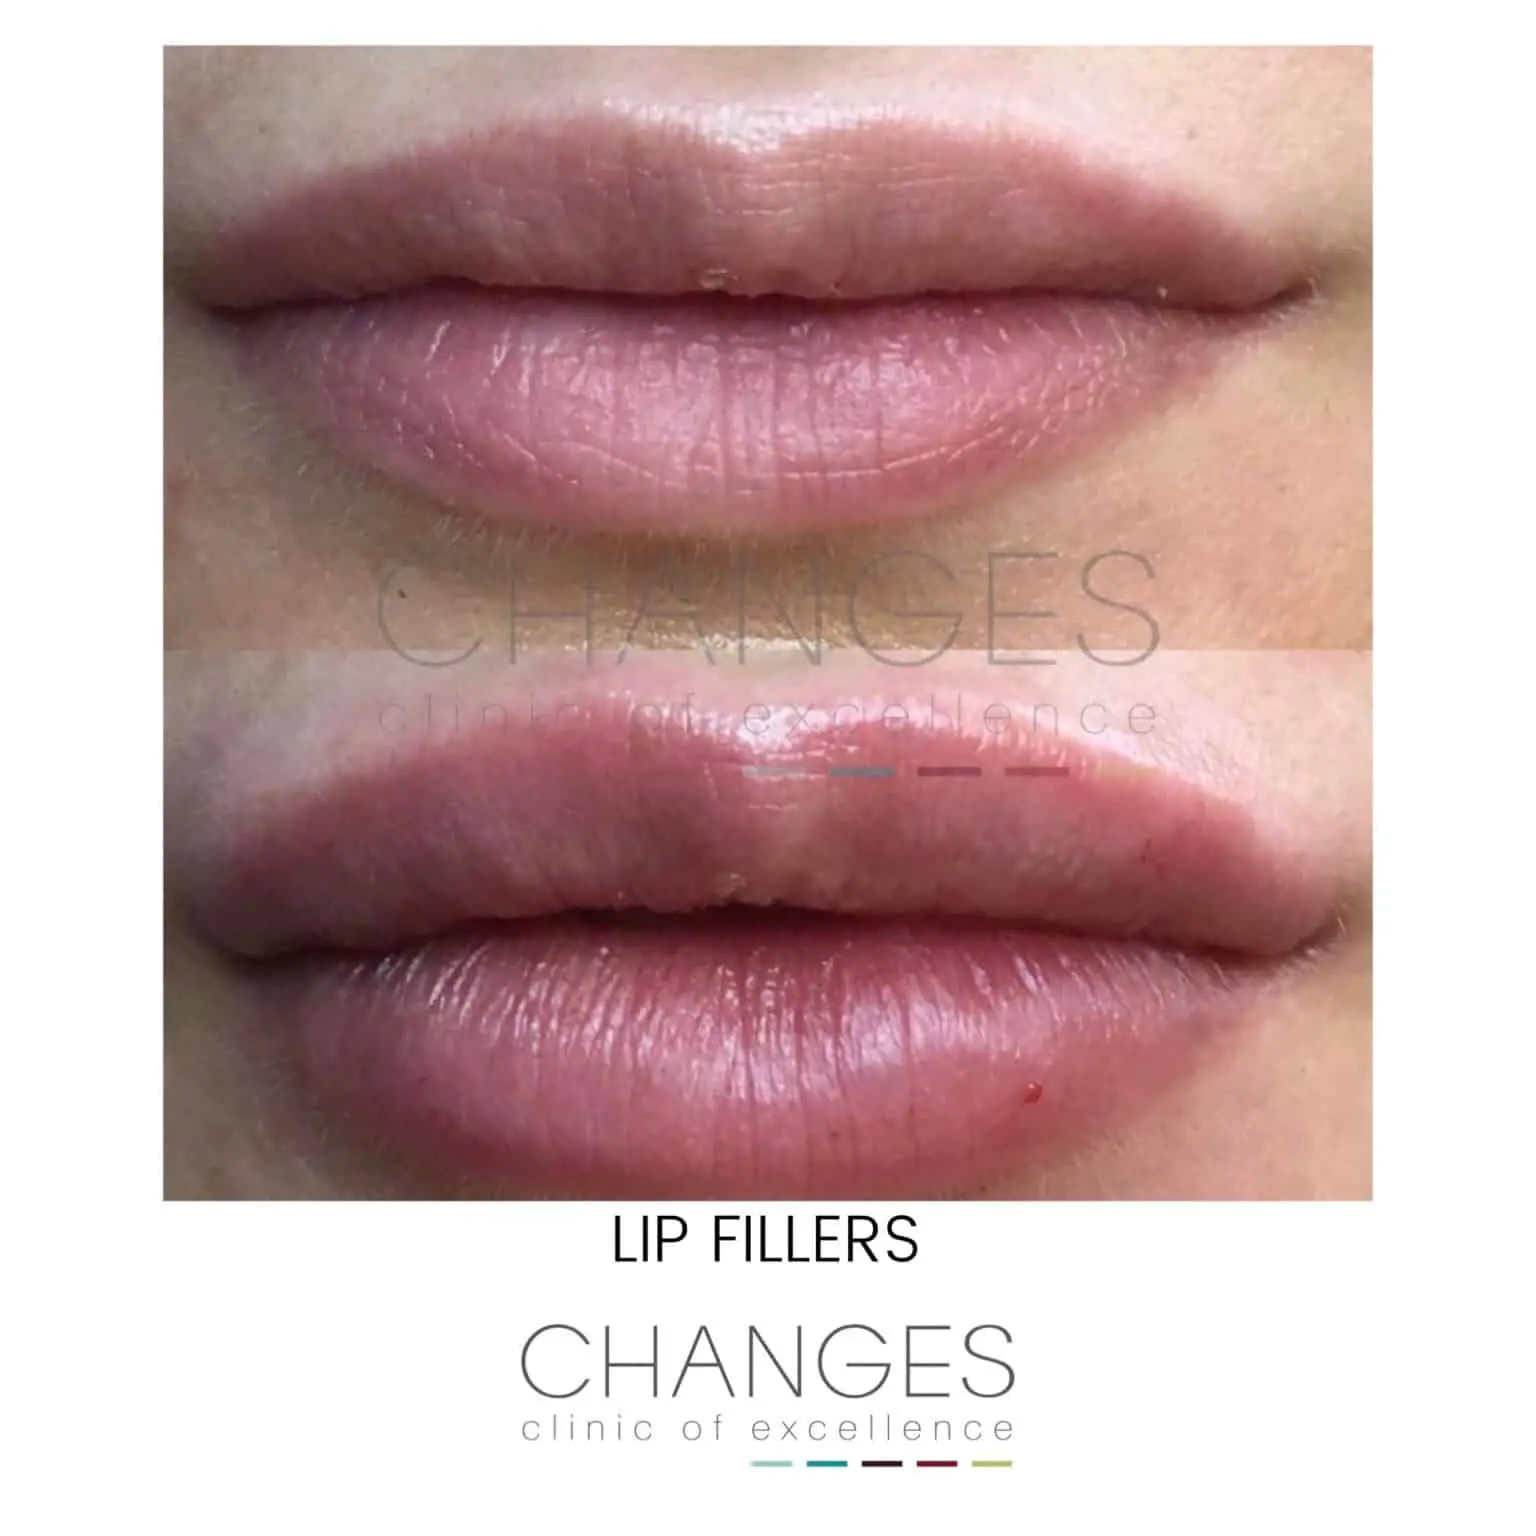 The Trout Pout is Out: Skilled Use of Lip Fillers: